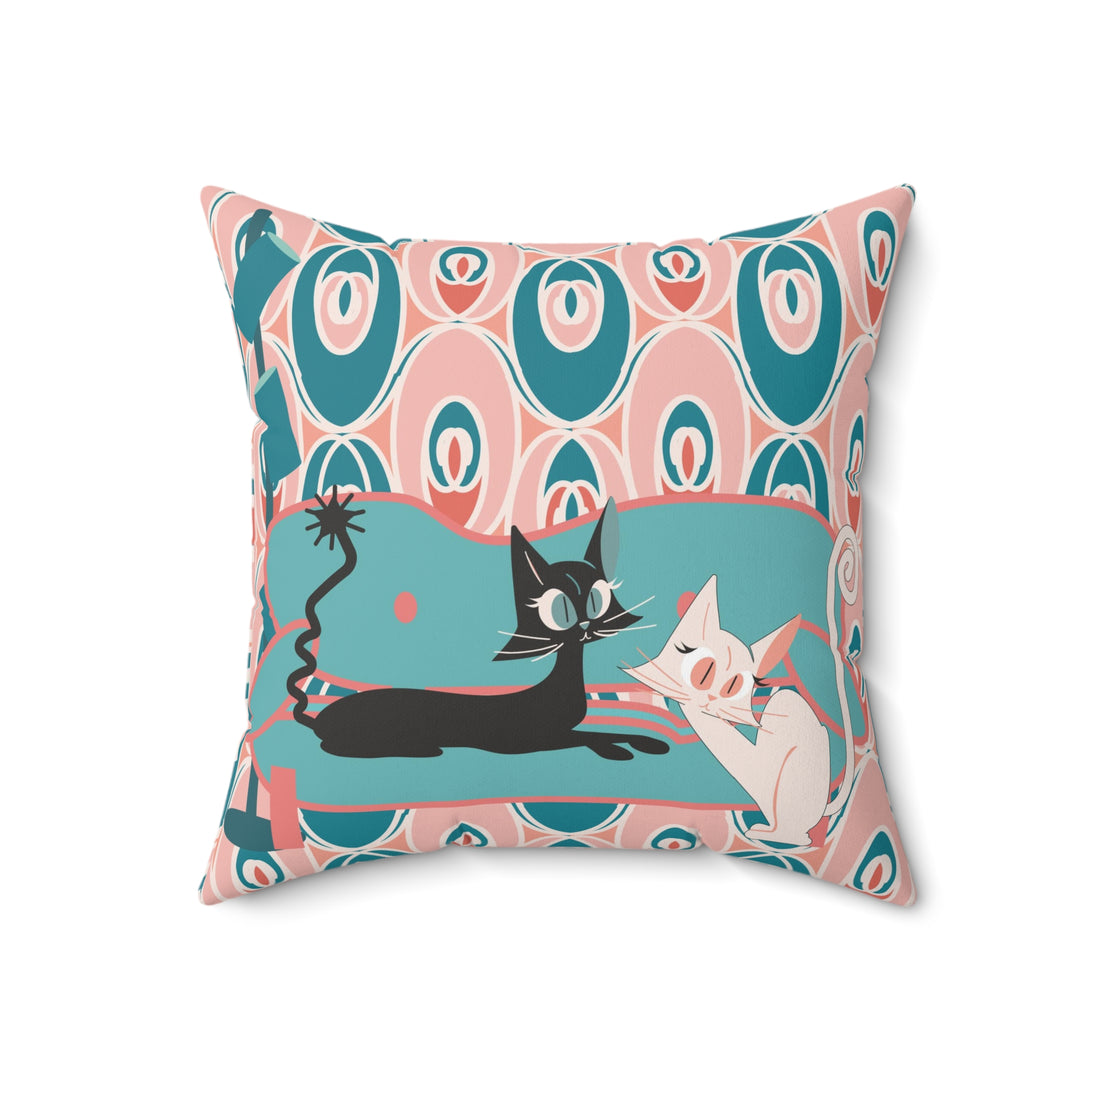 Atomic Black And White Kitty Cats, Mid Century Modern Teal Coral Pink, Kitschy Cute Pillow And Insert